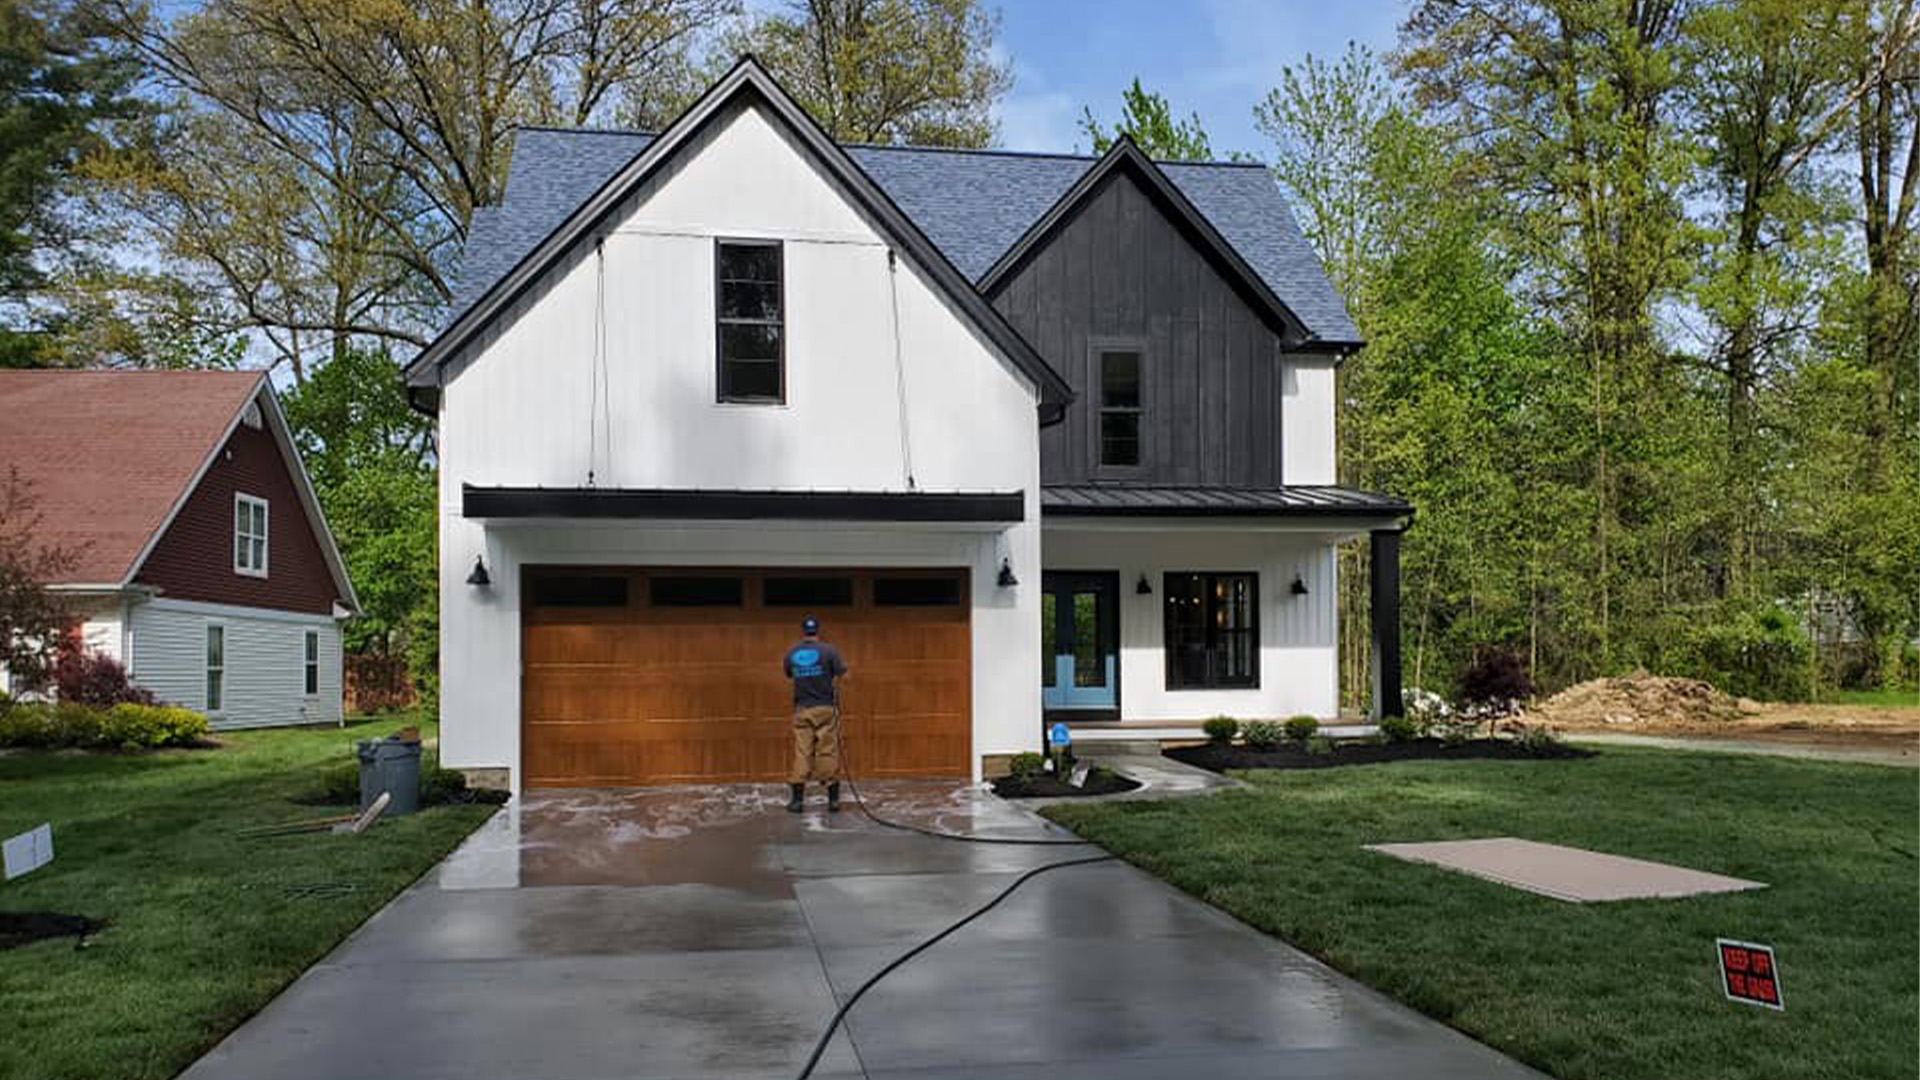 driveway cleaning,driveway cleaning services,affordable driveway cleaning,driveway pressure washing,pressure washing driveway,driveway sealing